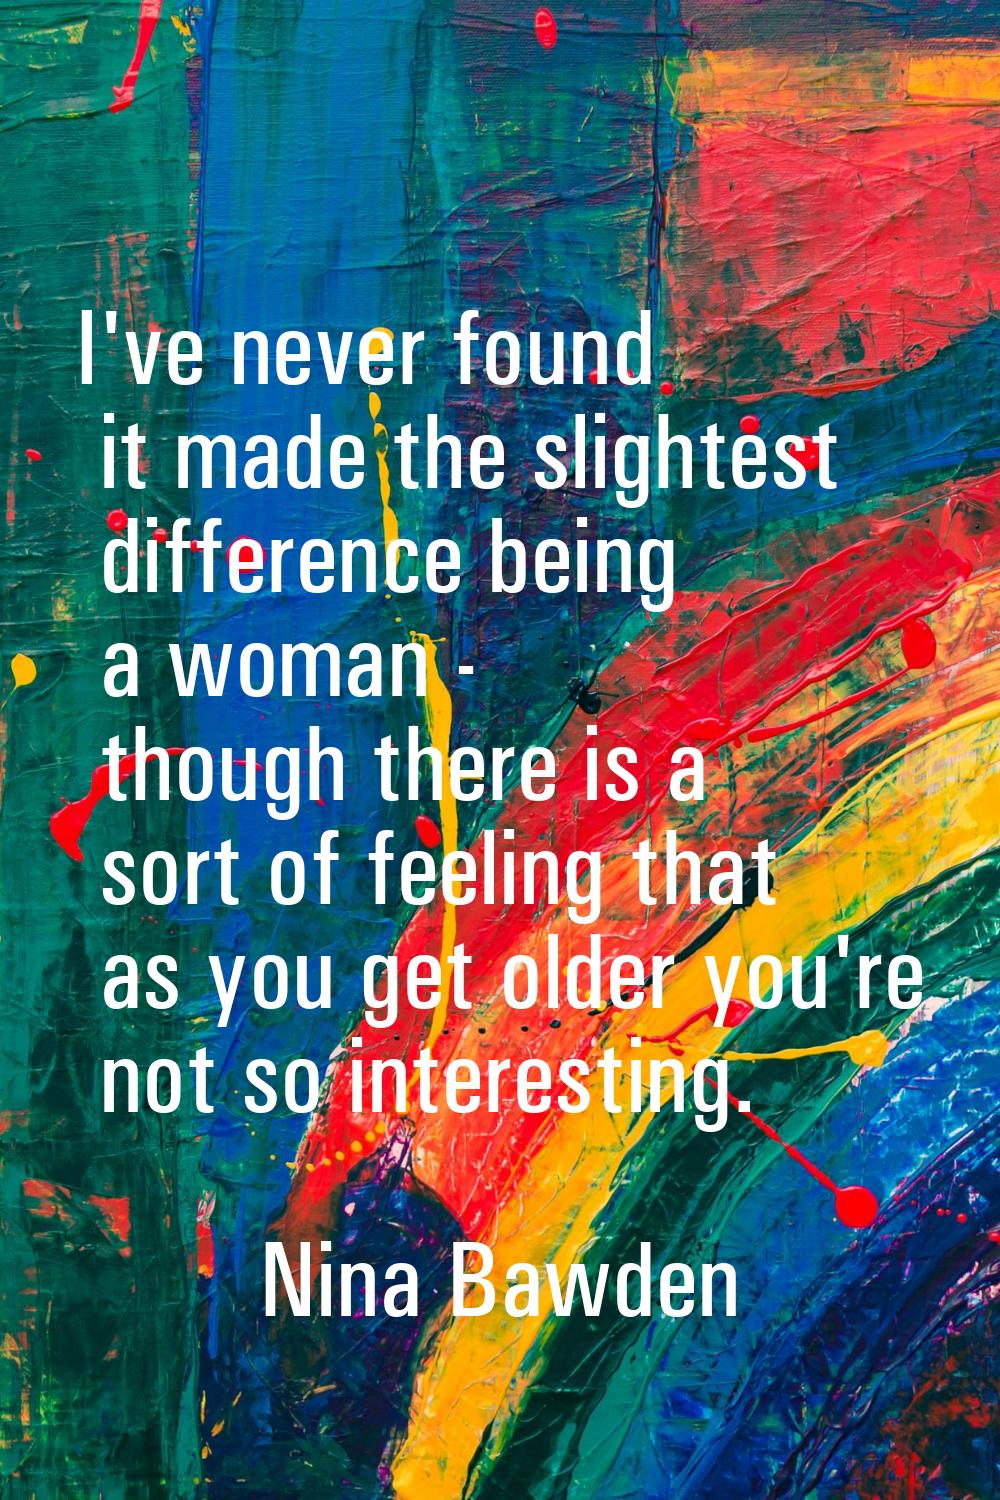 I've never found it made the slightest difference being a woman - though there is a sort of feeling